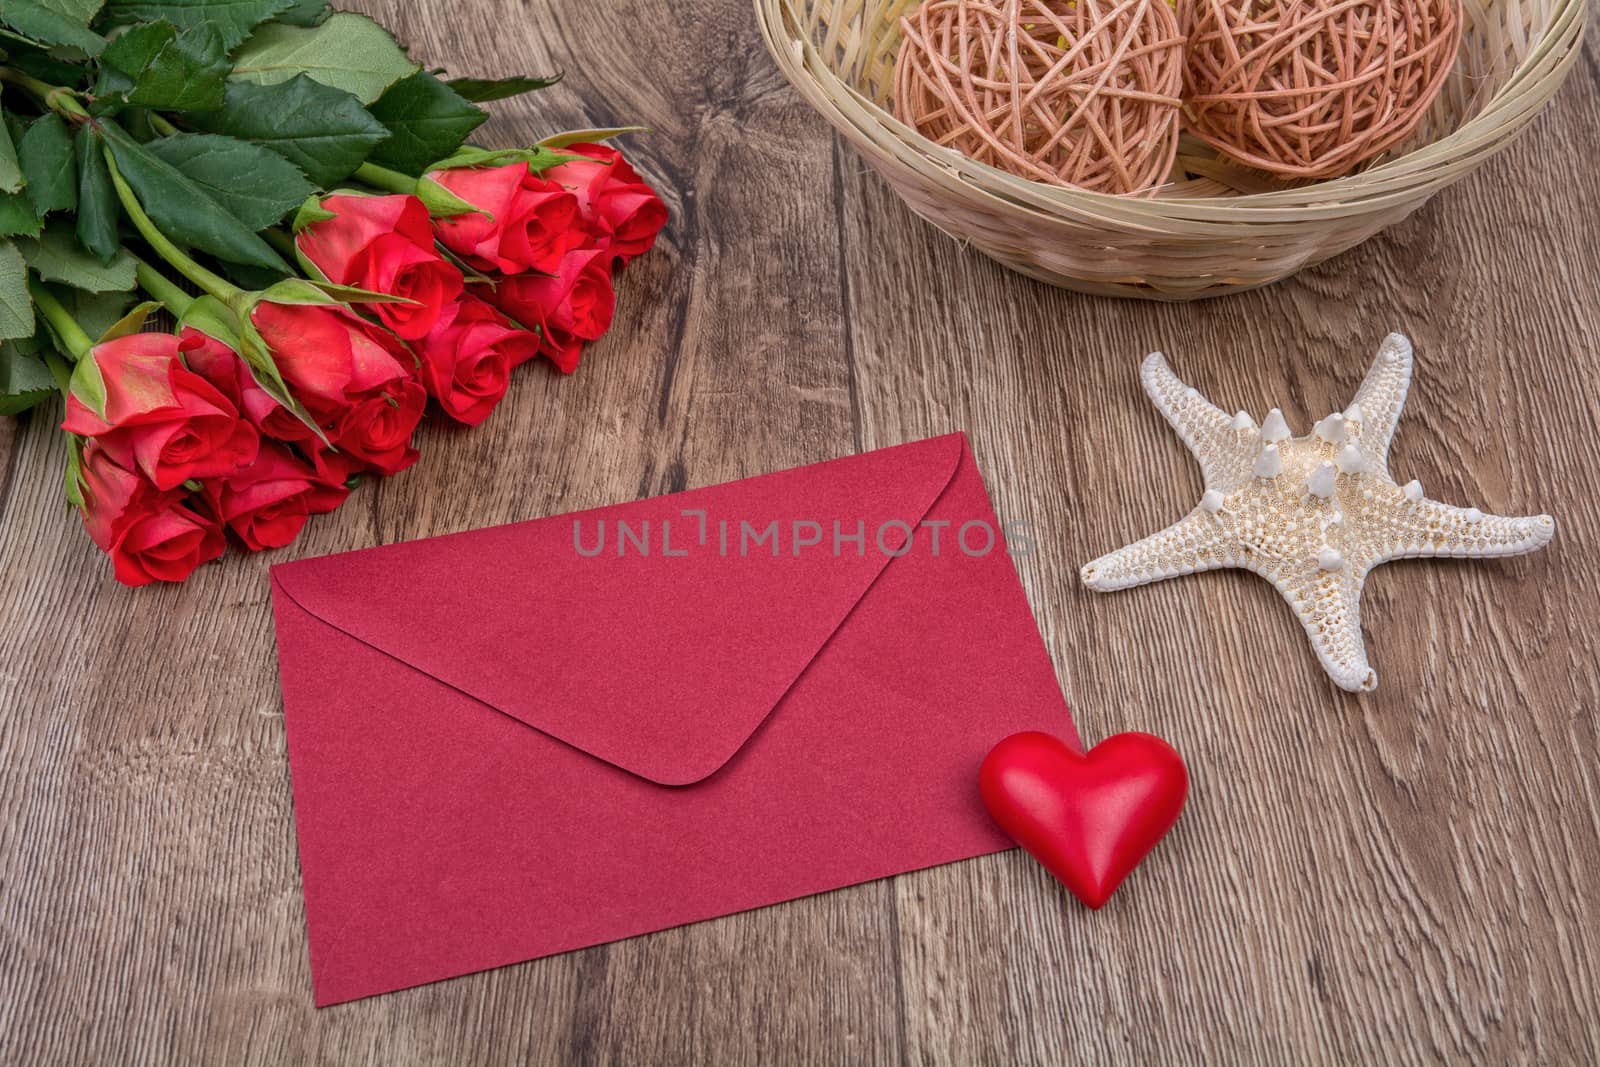 Red envelope, red roses and starfish on a wooden background by neryx